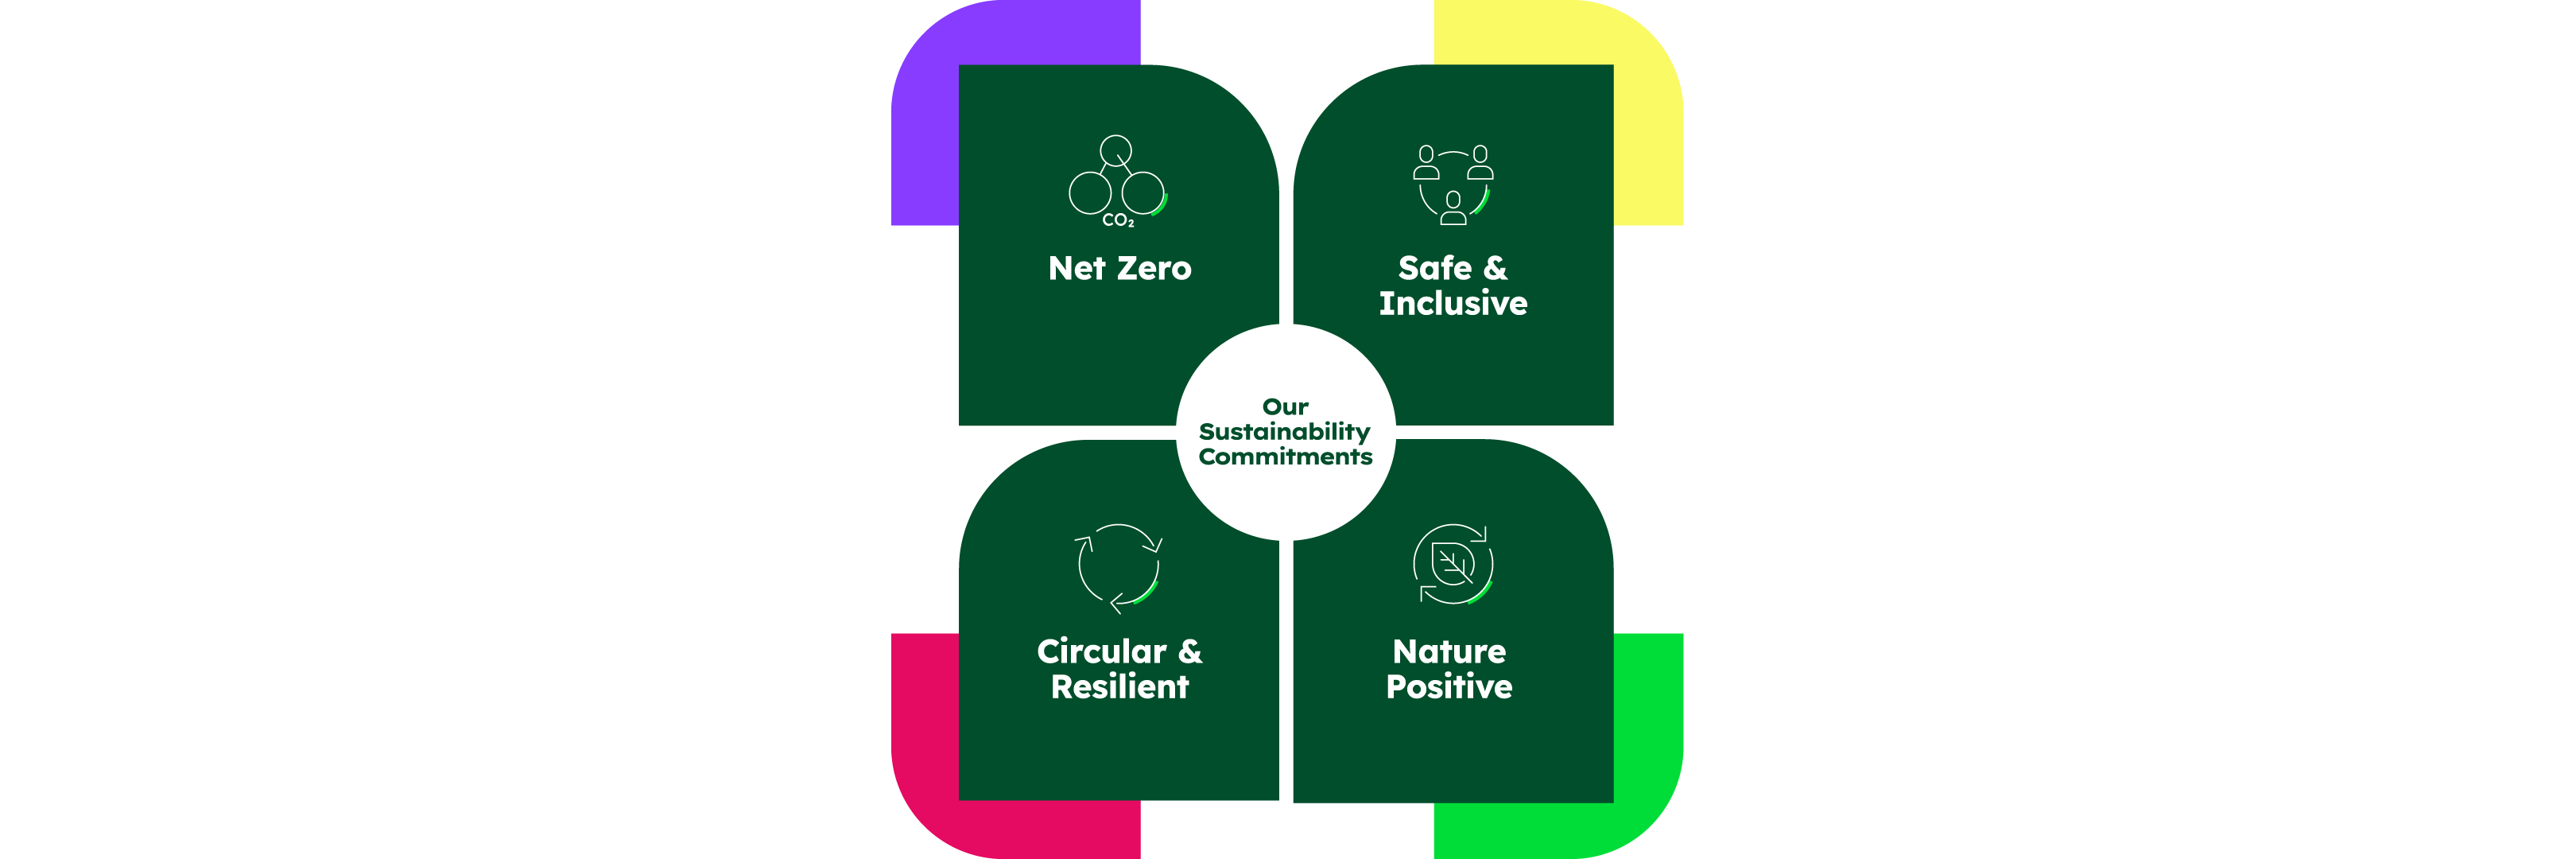 Four areas, each area represents the Heidelberg Materials Commitments which are: Net Zero, Safe and Inclusive, Circular and Resilient, Nature Positive